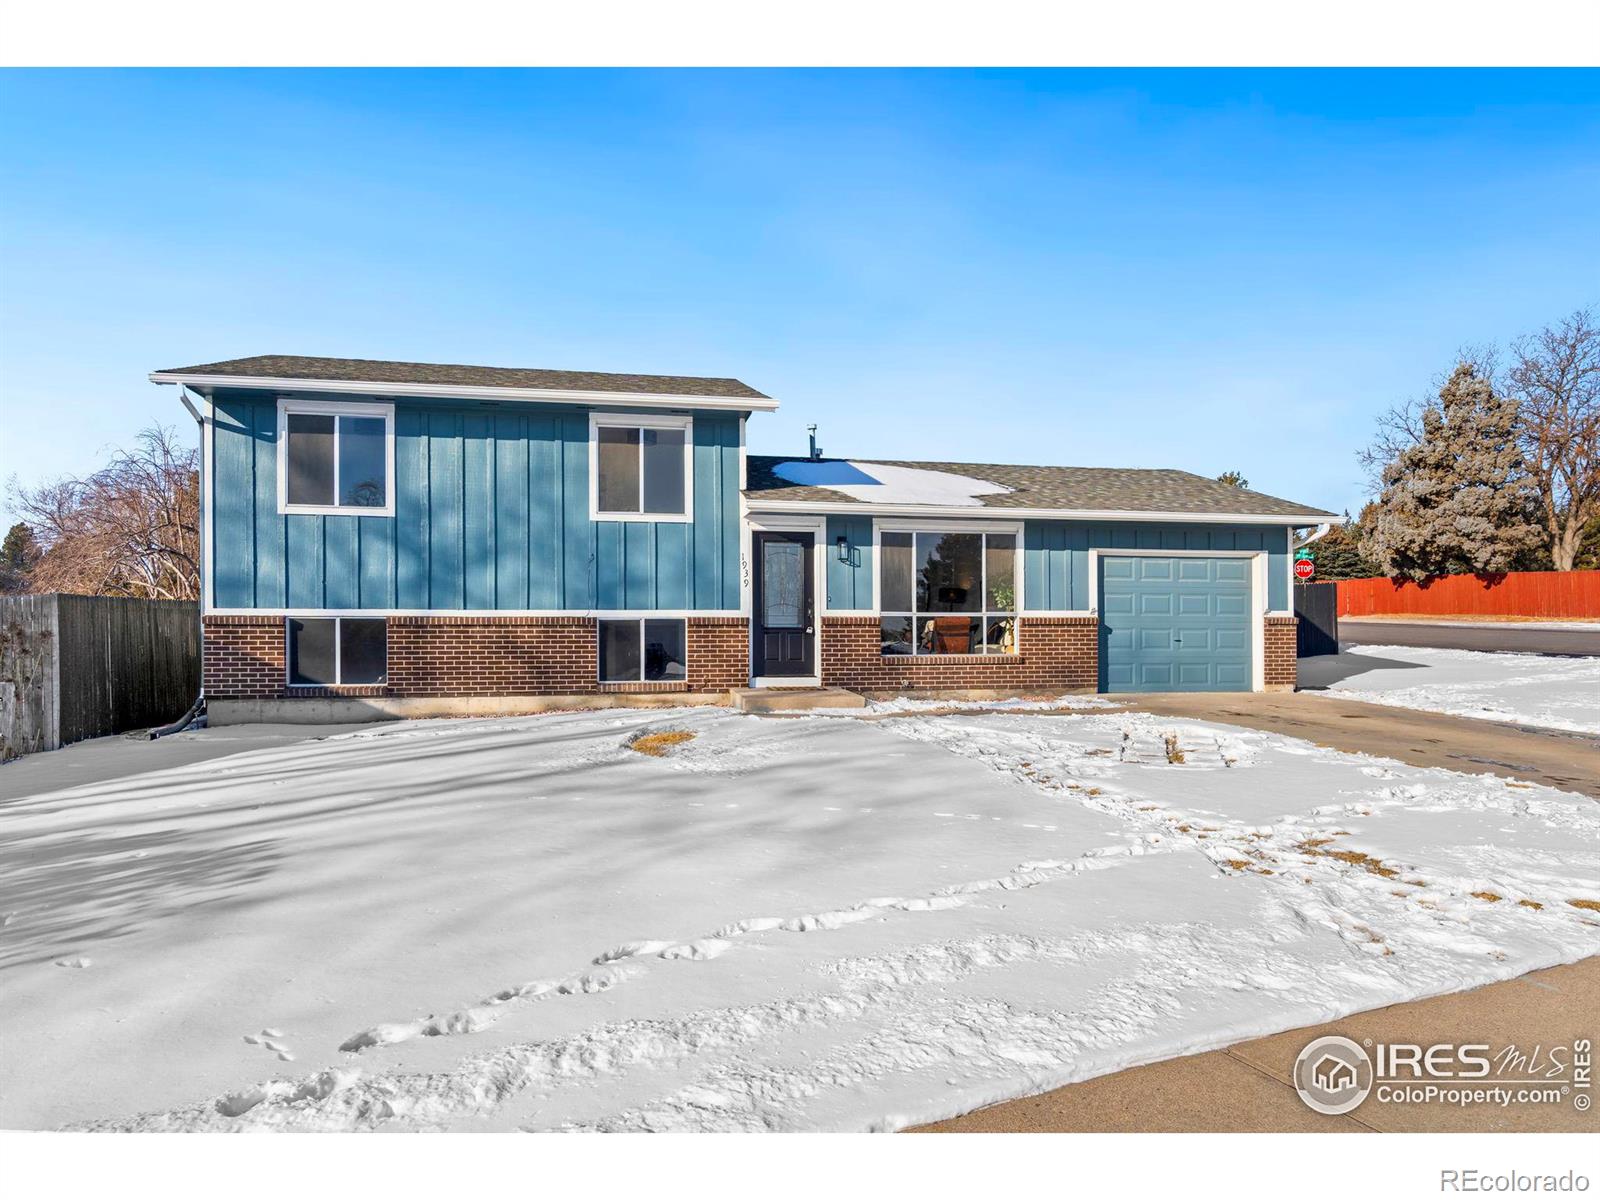 1939  34th Avenue, greeley MLS: 4567891001901 Beds: 4 Baths: 2 Price: $390,000